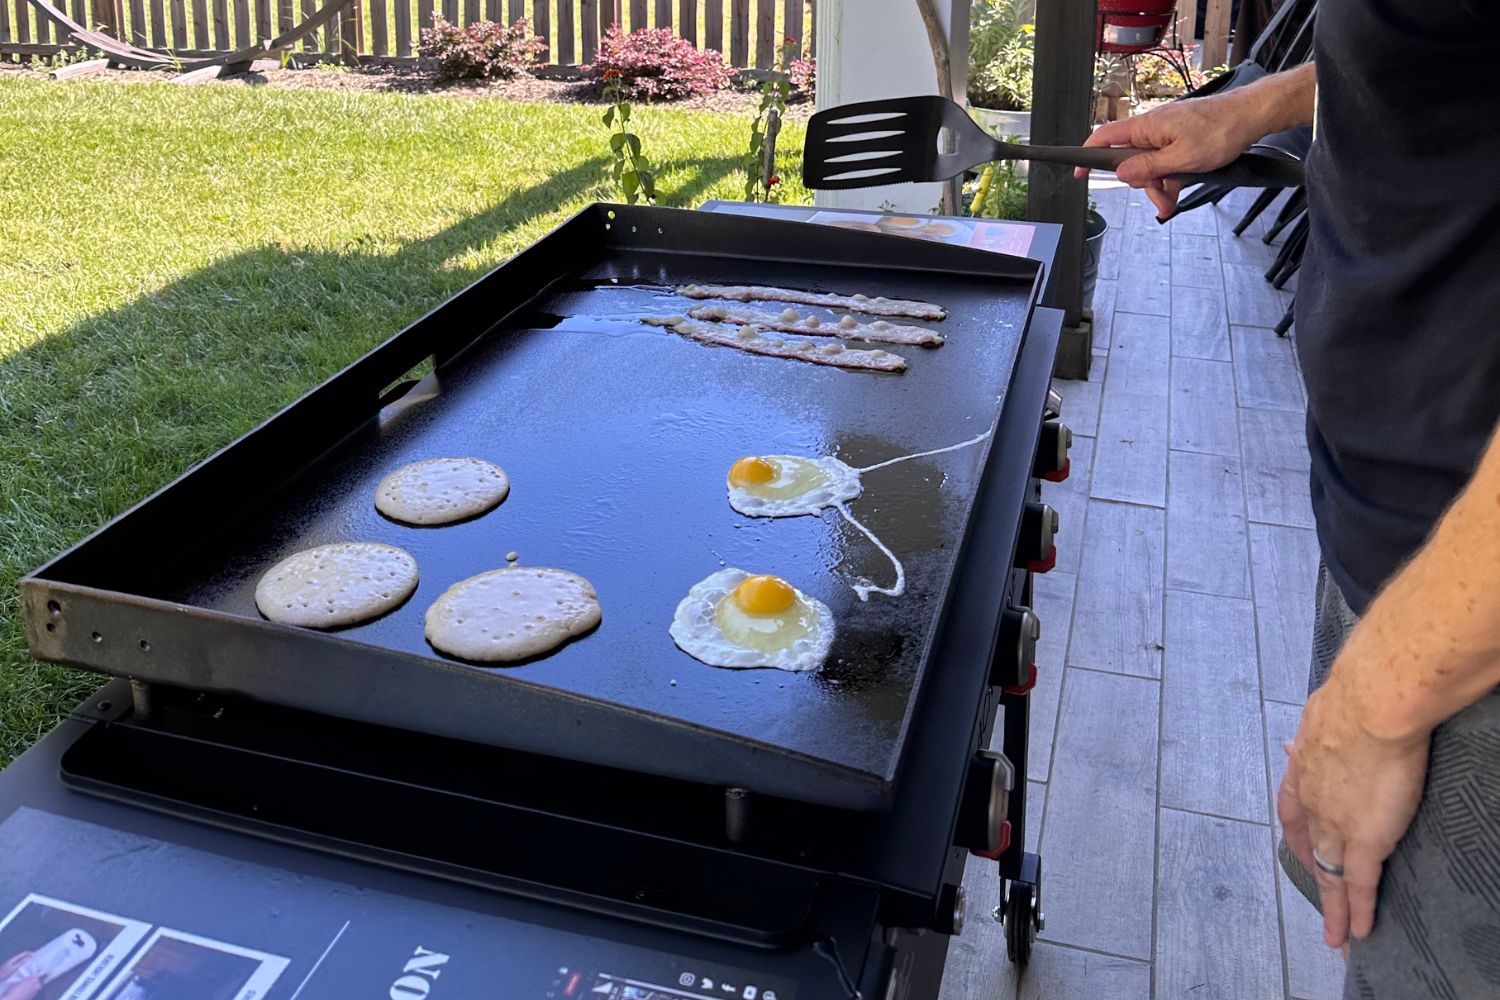 Person cooking pancakes, eggs, and bacon on 36-inch Blackstone griddle in backyard.